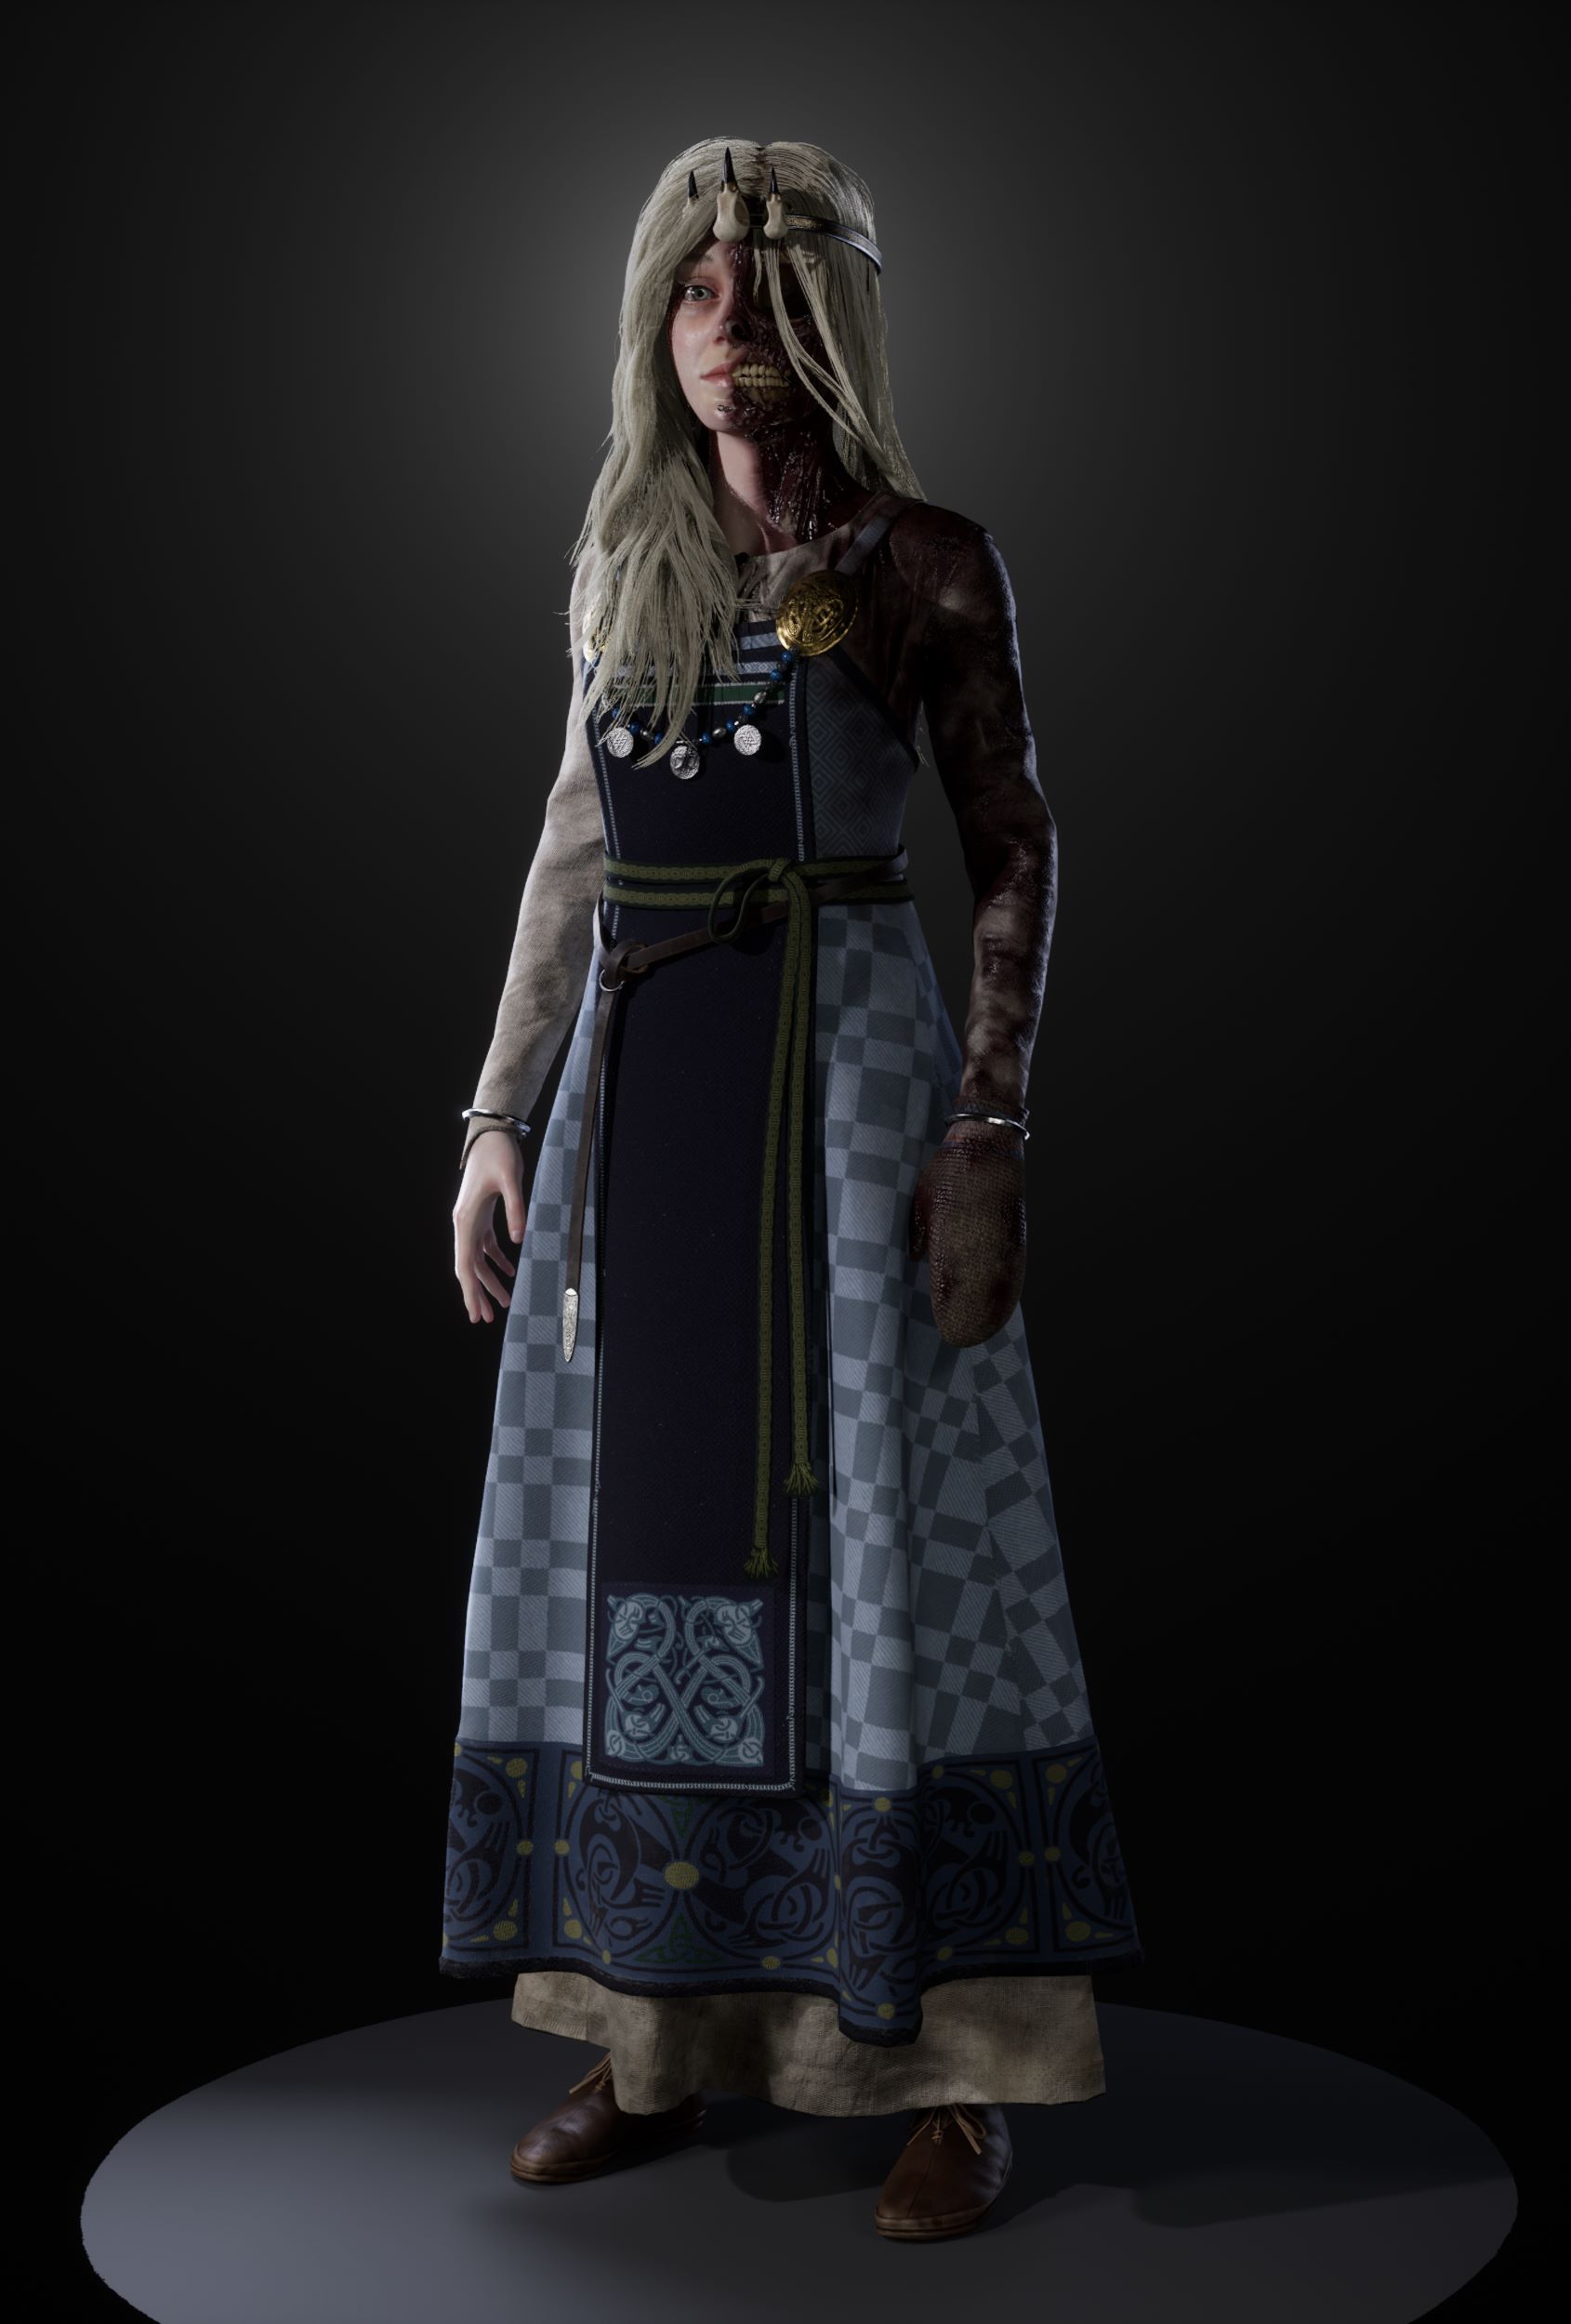 A full body shot of Hel. She wears a blue apron dress with embroidered knotwork.